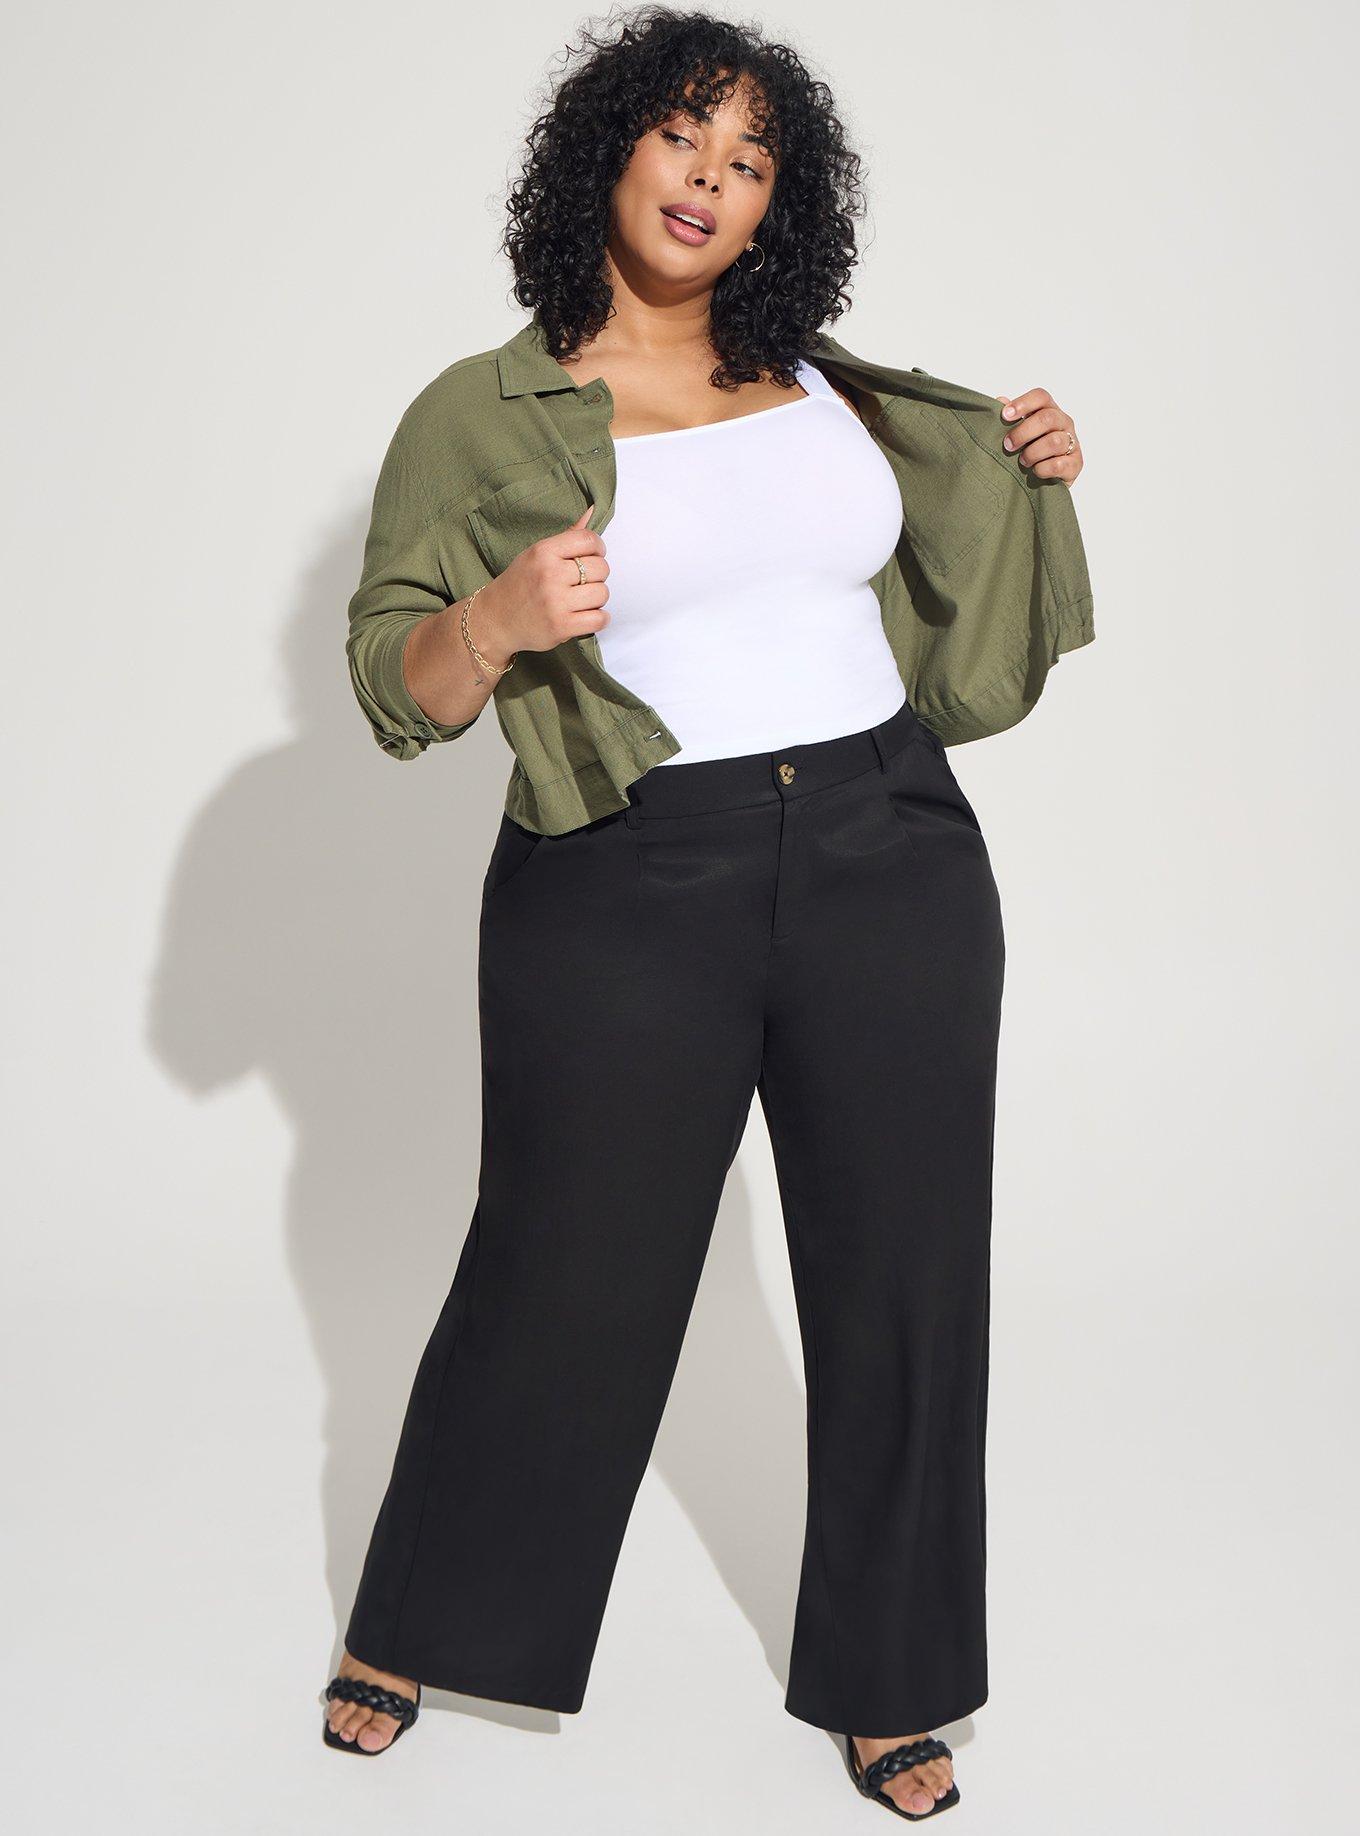 Torrid - Sexy Sale STARTS NOW! 40% off all bras when you buy 3 or more,  Panties 5 for $35, Bralettes BOGO $10, Lingerie, Sleep & Swim 30% off  (select styles) —